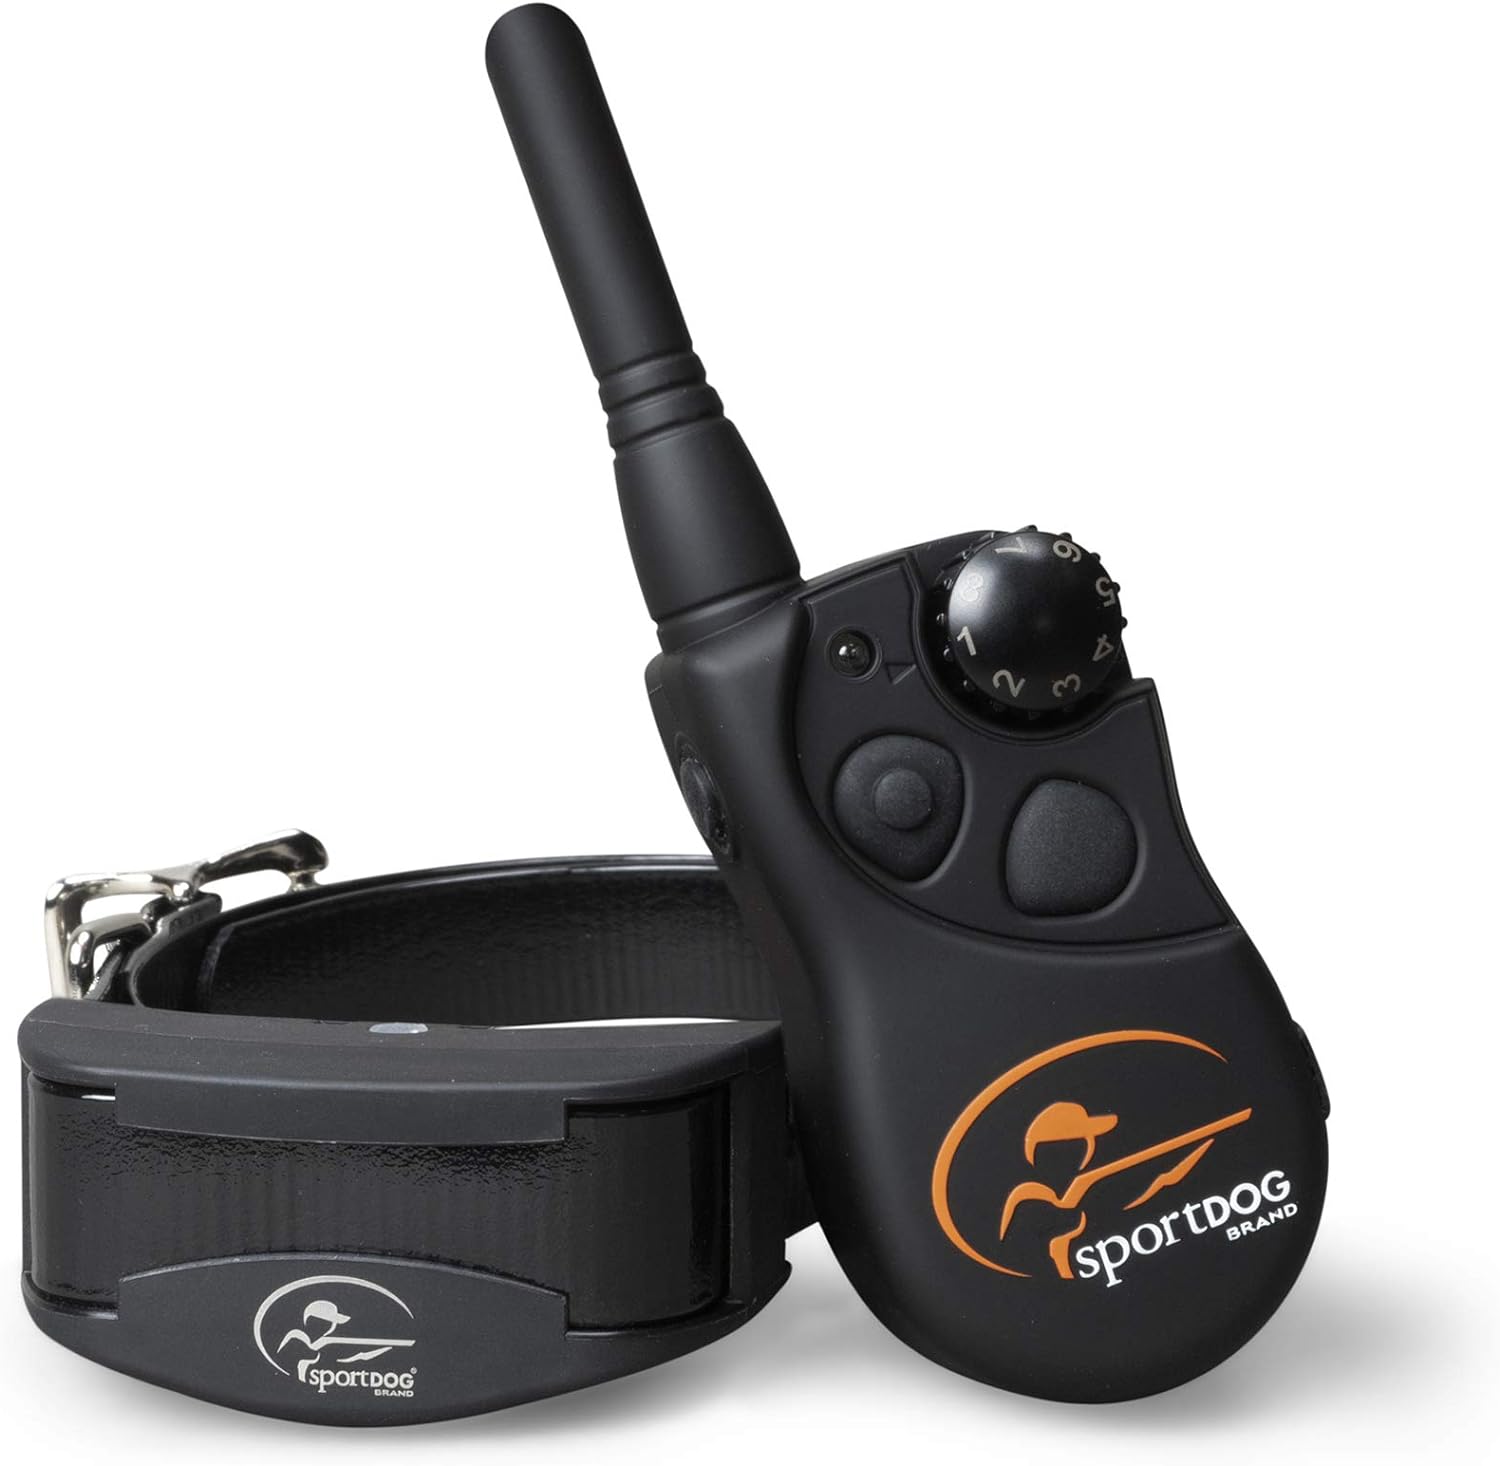 SportDOG Brand YardTrainer Family Dog Training Collars- 300 Yard Range- Rechargeable, Remote Trainers with Static, Vibrate, and Tone - Black - YT-300